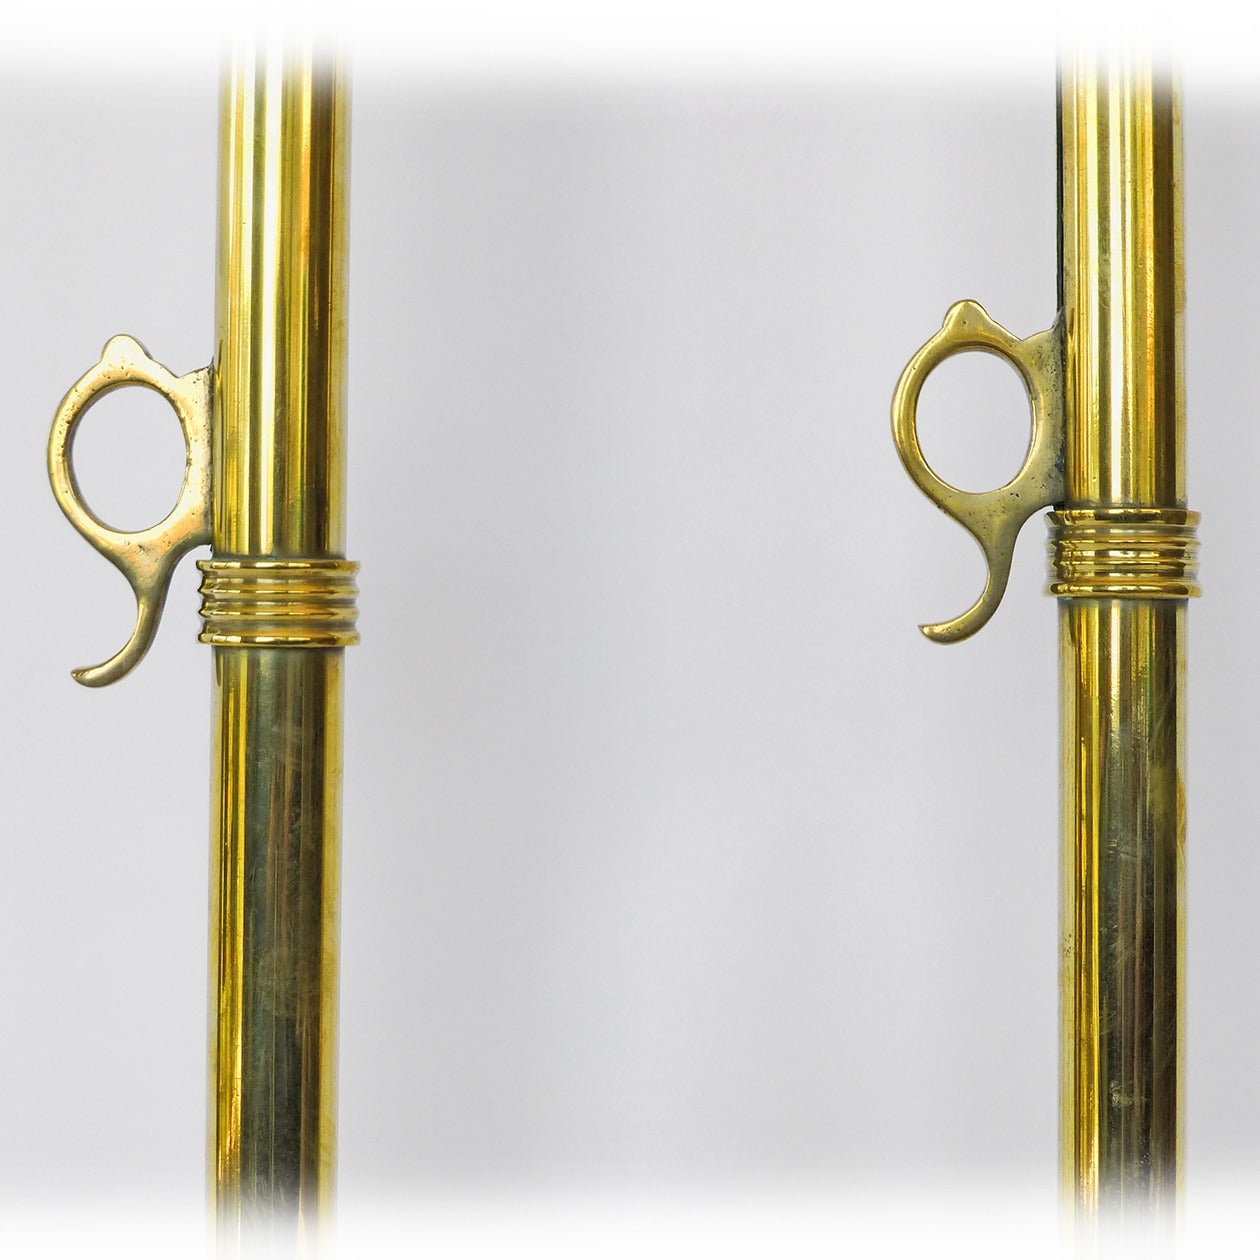 English brass pulpit sticks with side ejectors

circa 1875 

Measure: 20 3/4? height.